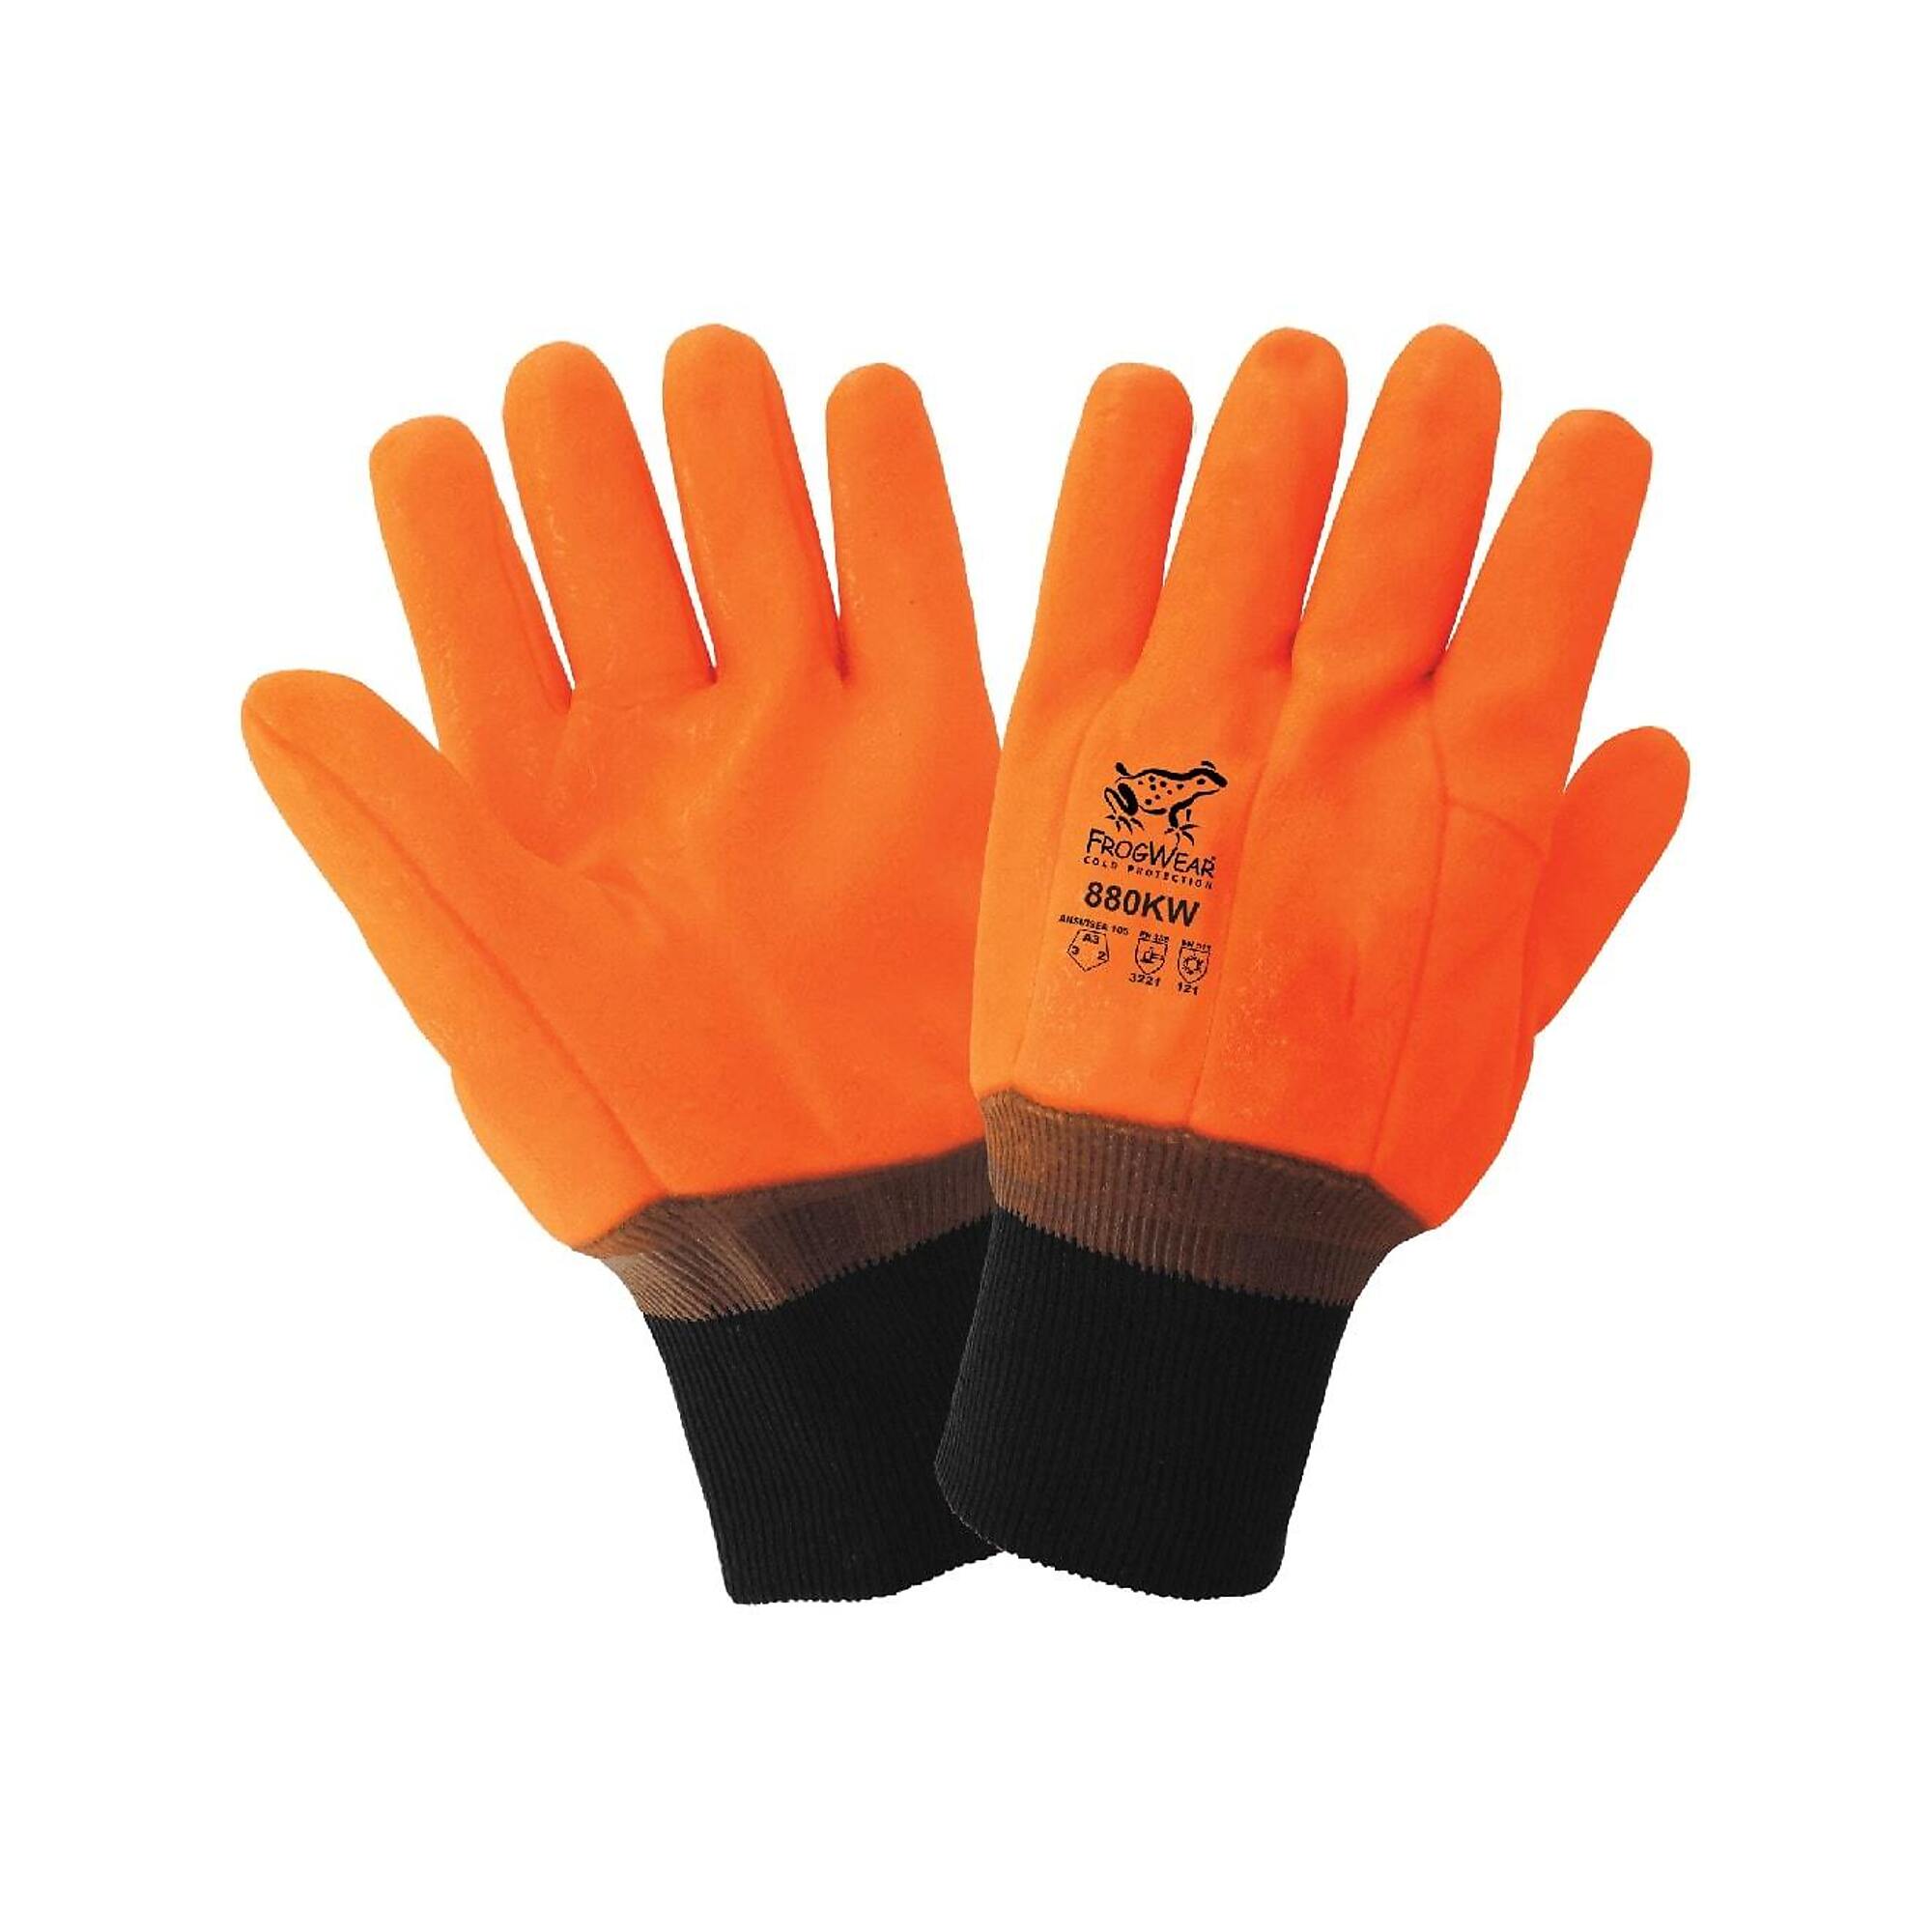 FrogWear, HV Org, Insulated, Dbl PVC Coat, Cut Res A3 Gloves- 12 Pairs, Size One Size, Color High-Visibility Orange, Included (qty.) 12 Model 880KW